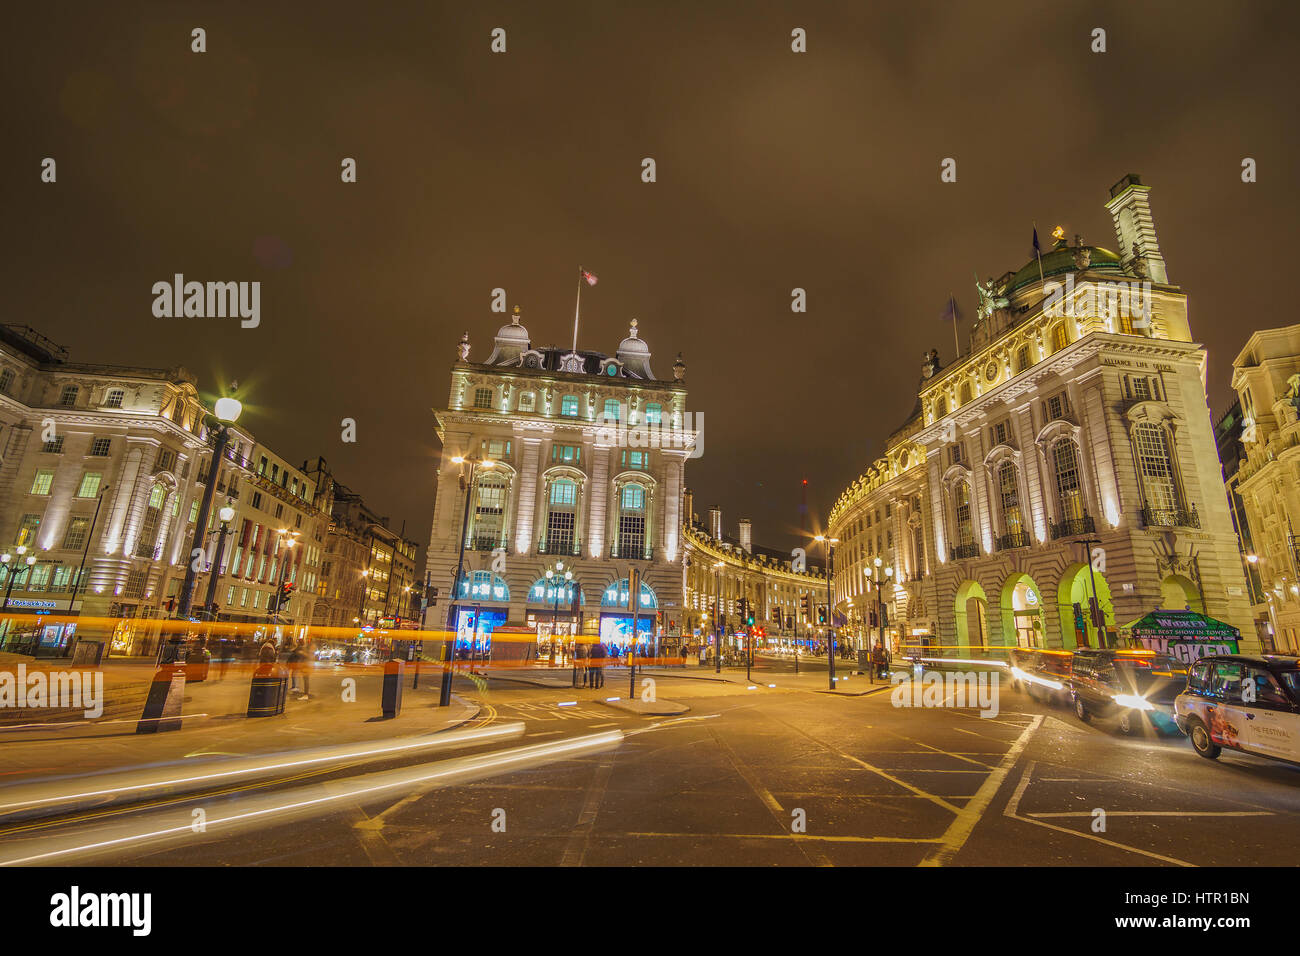 Urban view of london Picadilly Circus at night. long exposure hdr street photography in London, United Kingdom. Stock Photo